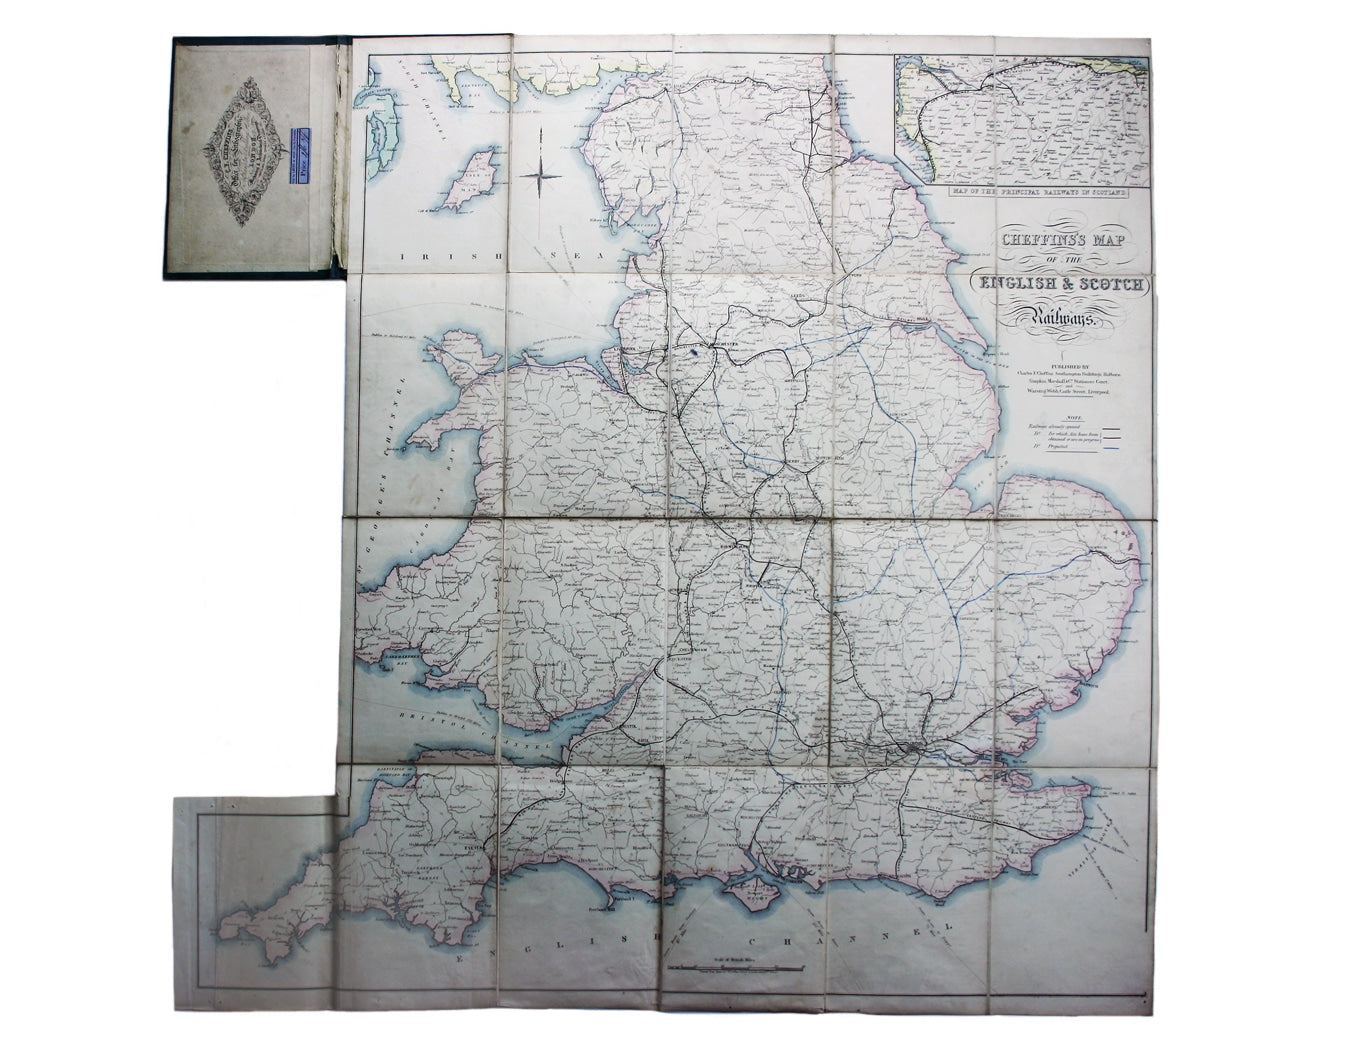 Cheffin’s Map of the Railways in England & Scotland